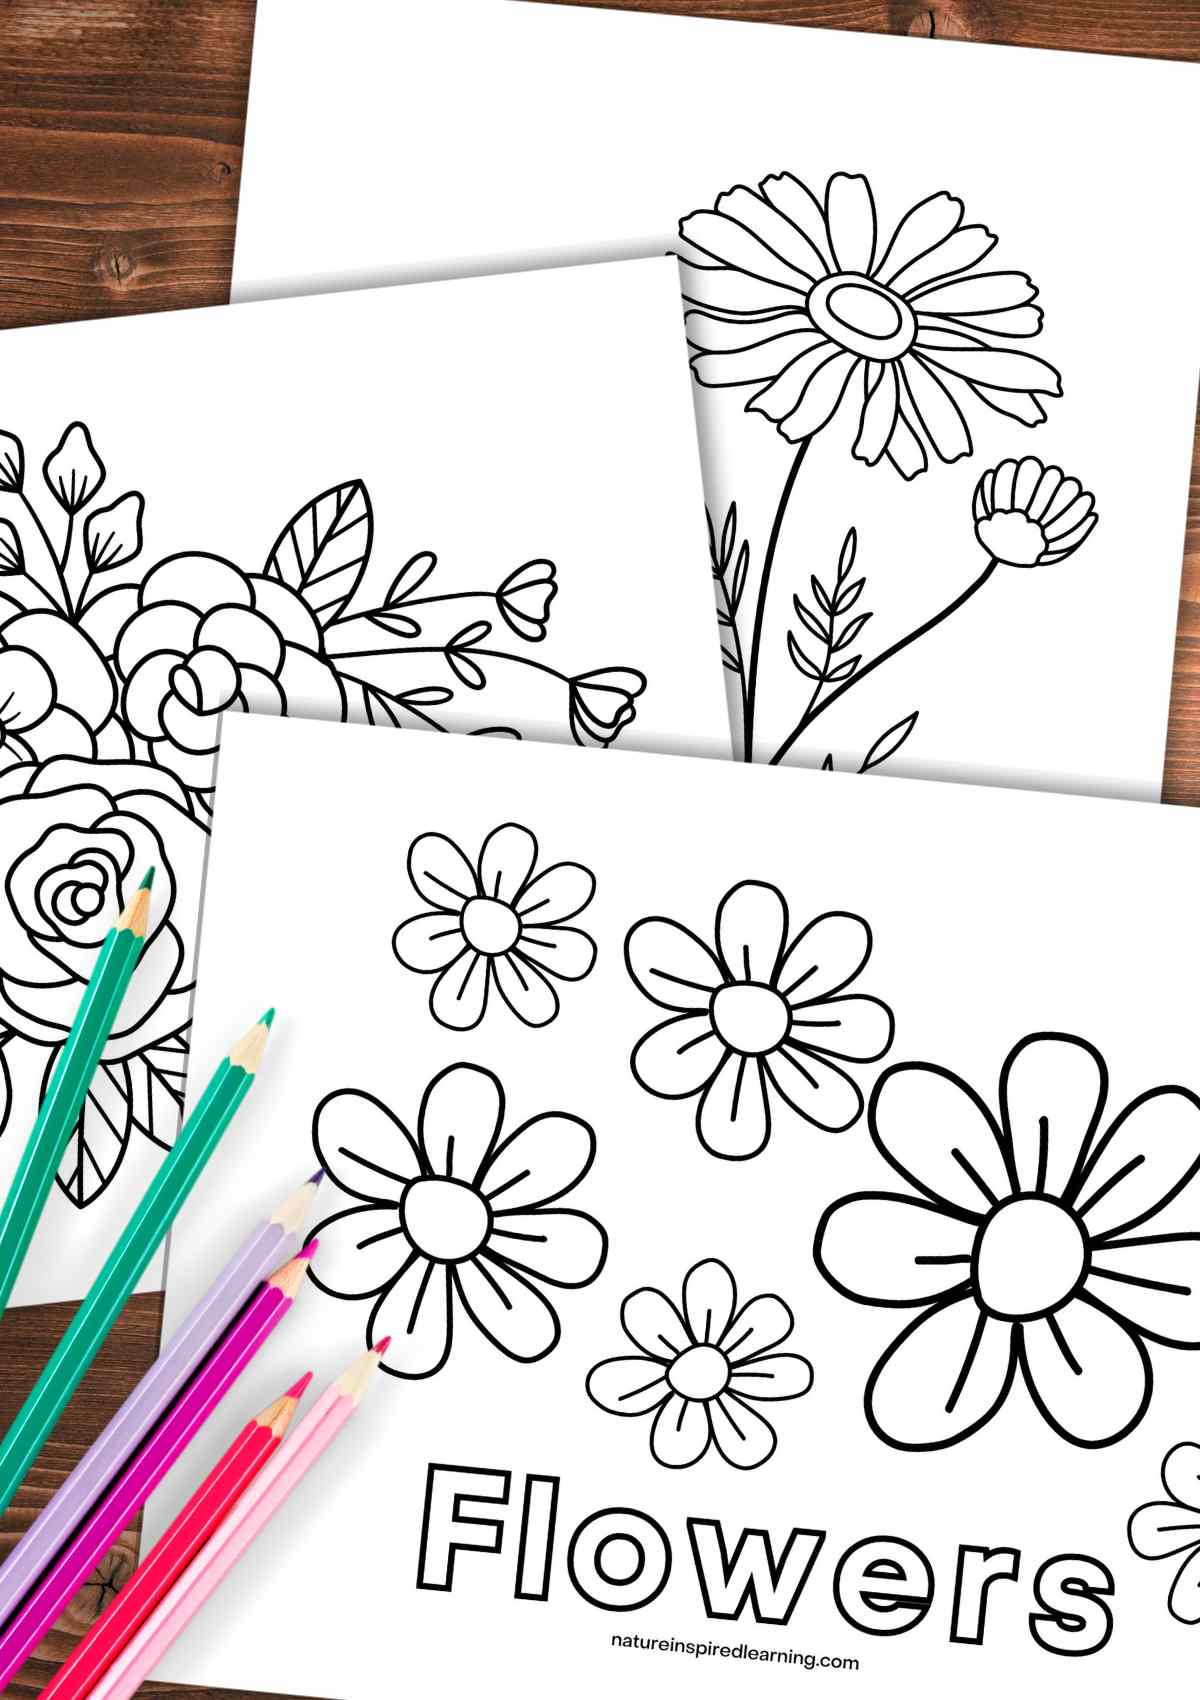 three coloring sheets with different flower designs overlapping on a wooden background with colored pencils on the bottom left corner.